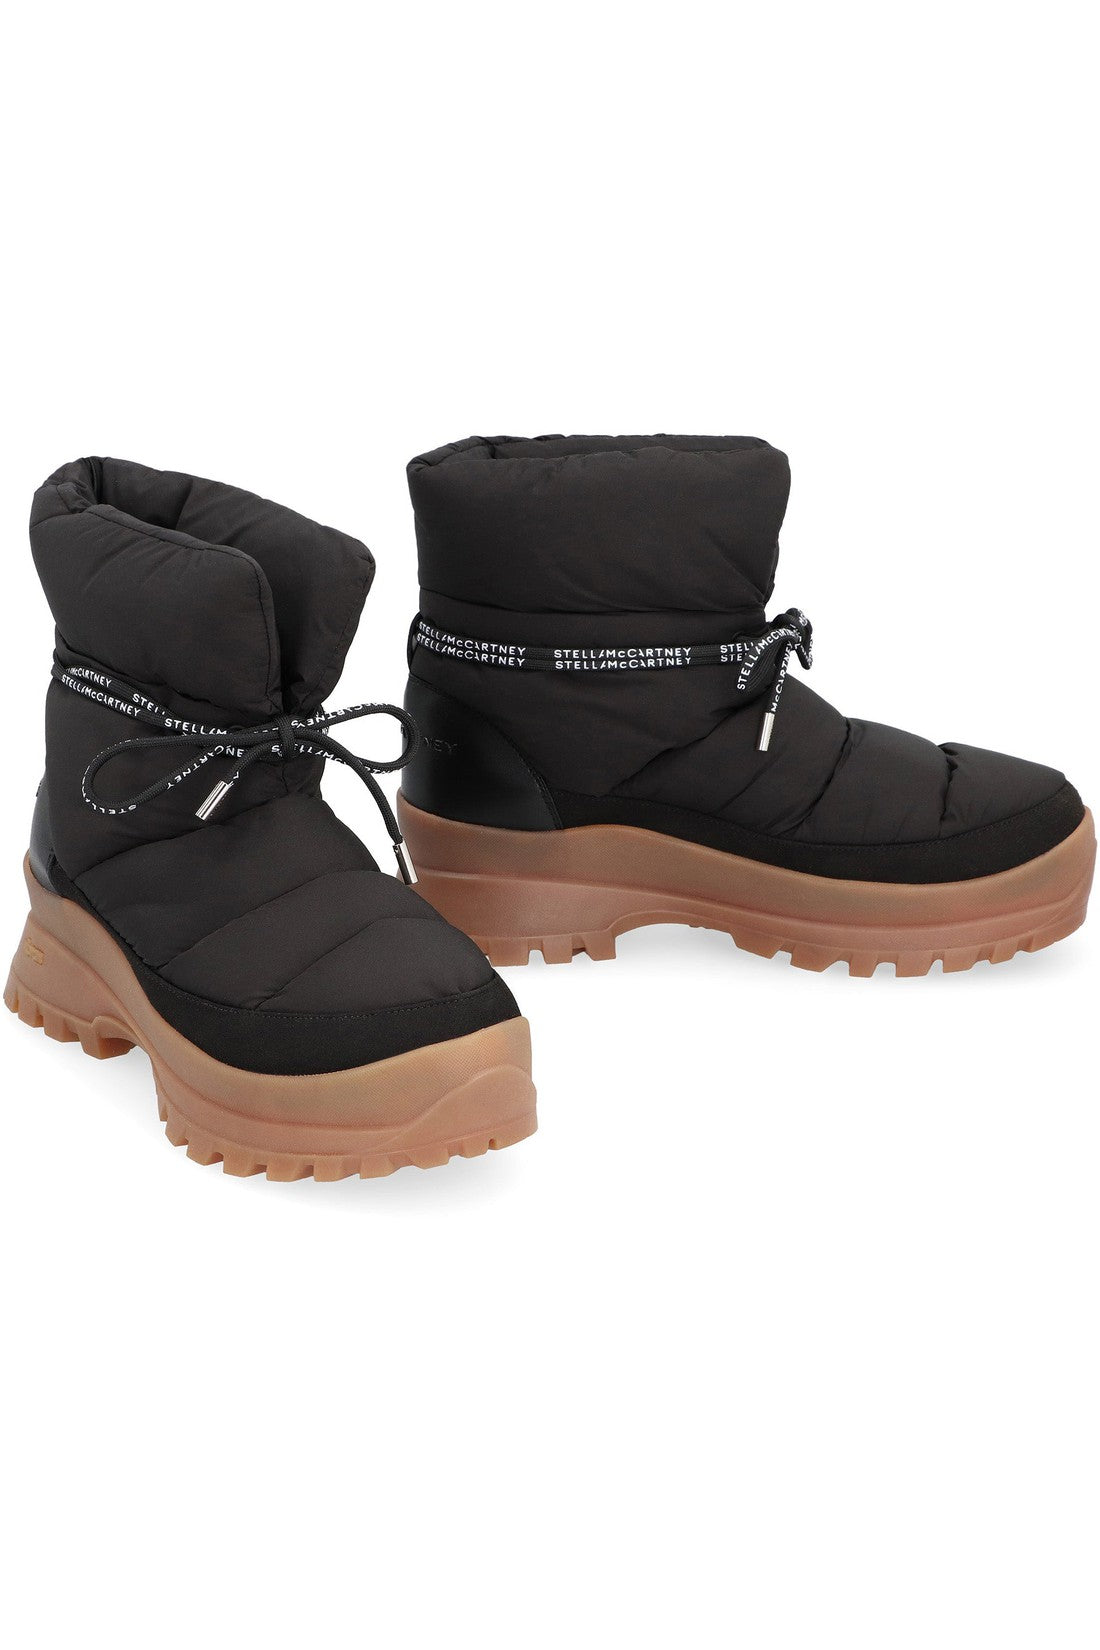 Stella McCartney-OUTLET-SALE-Trace hiking boots-ARCHIVIST